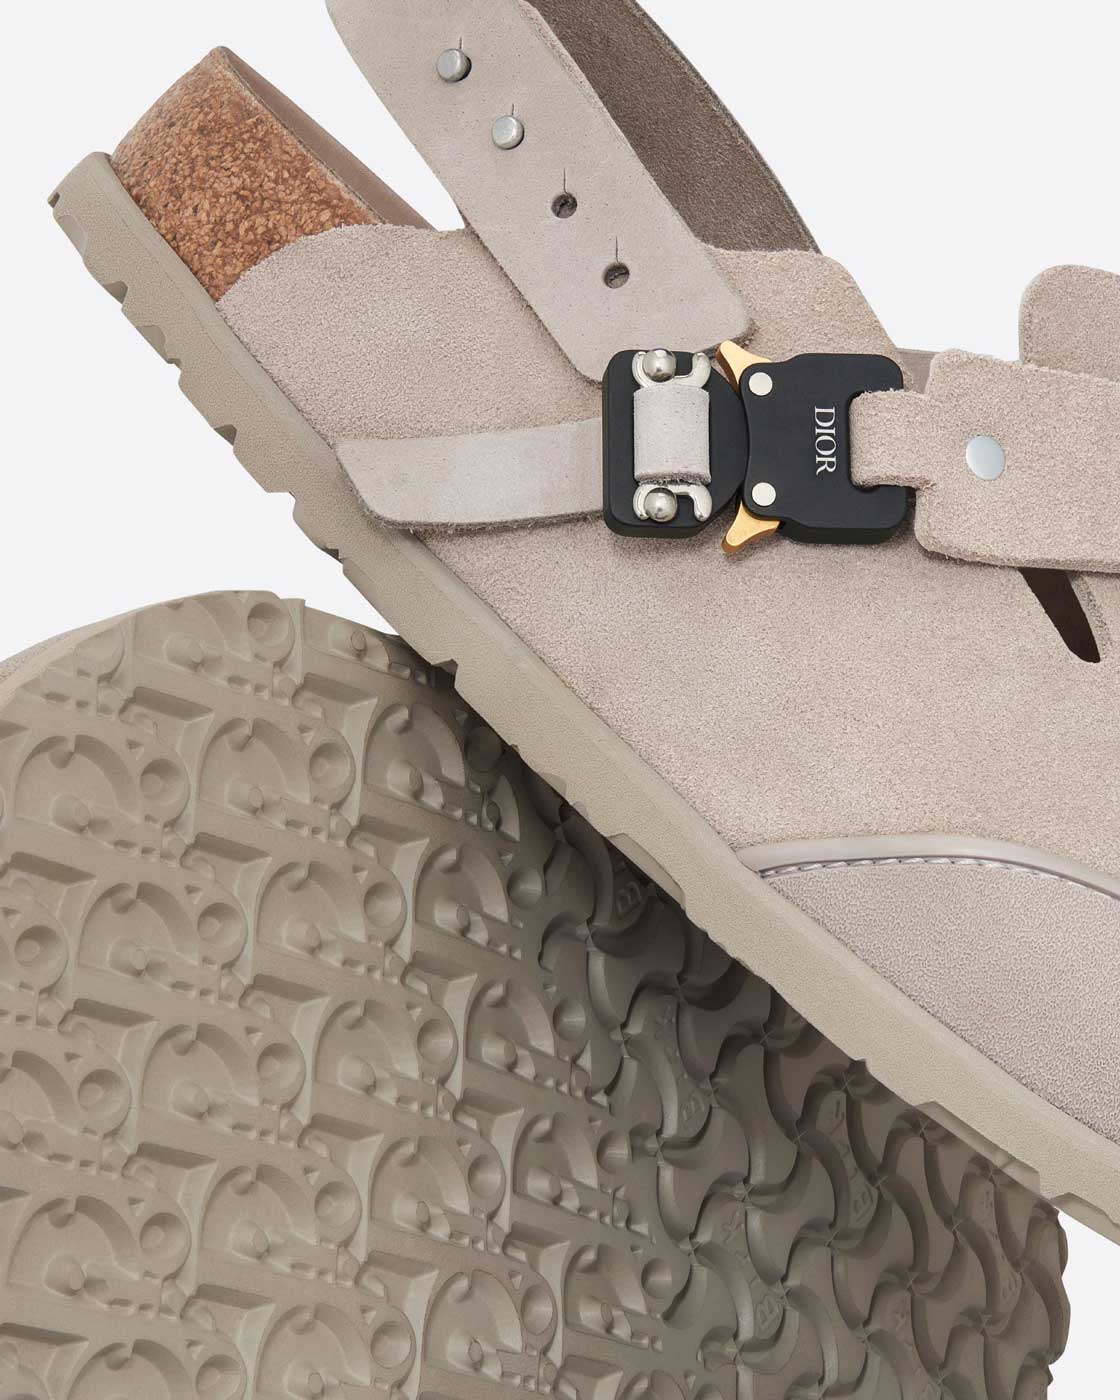 These Dior x Birkenstocks are the Sandals You Need this Summer